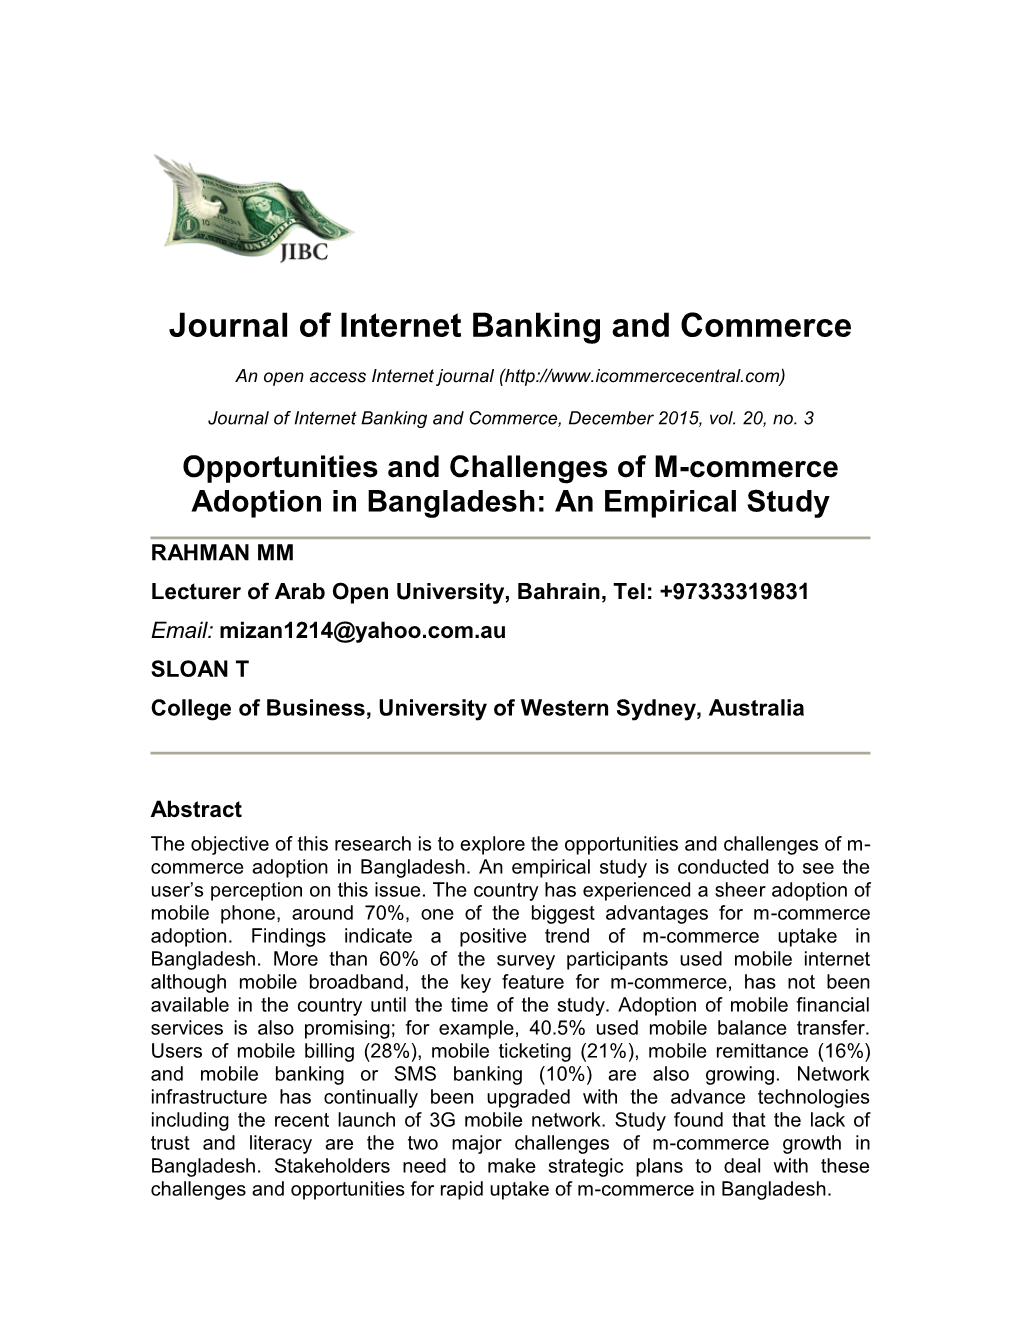 Opportunities and Challenges of M-Commerce Adoption in Bangladesh: an Empirical Study